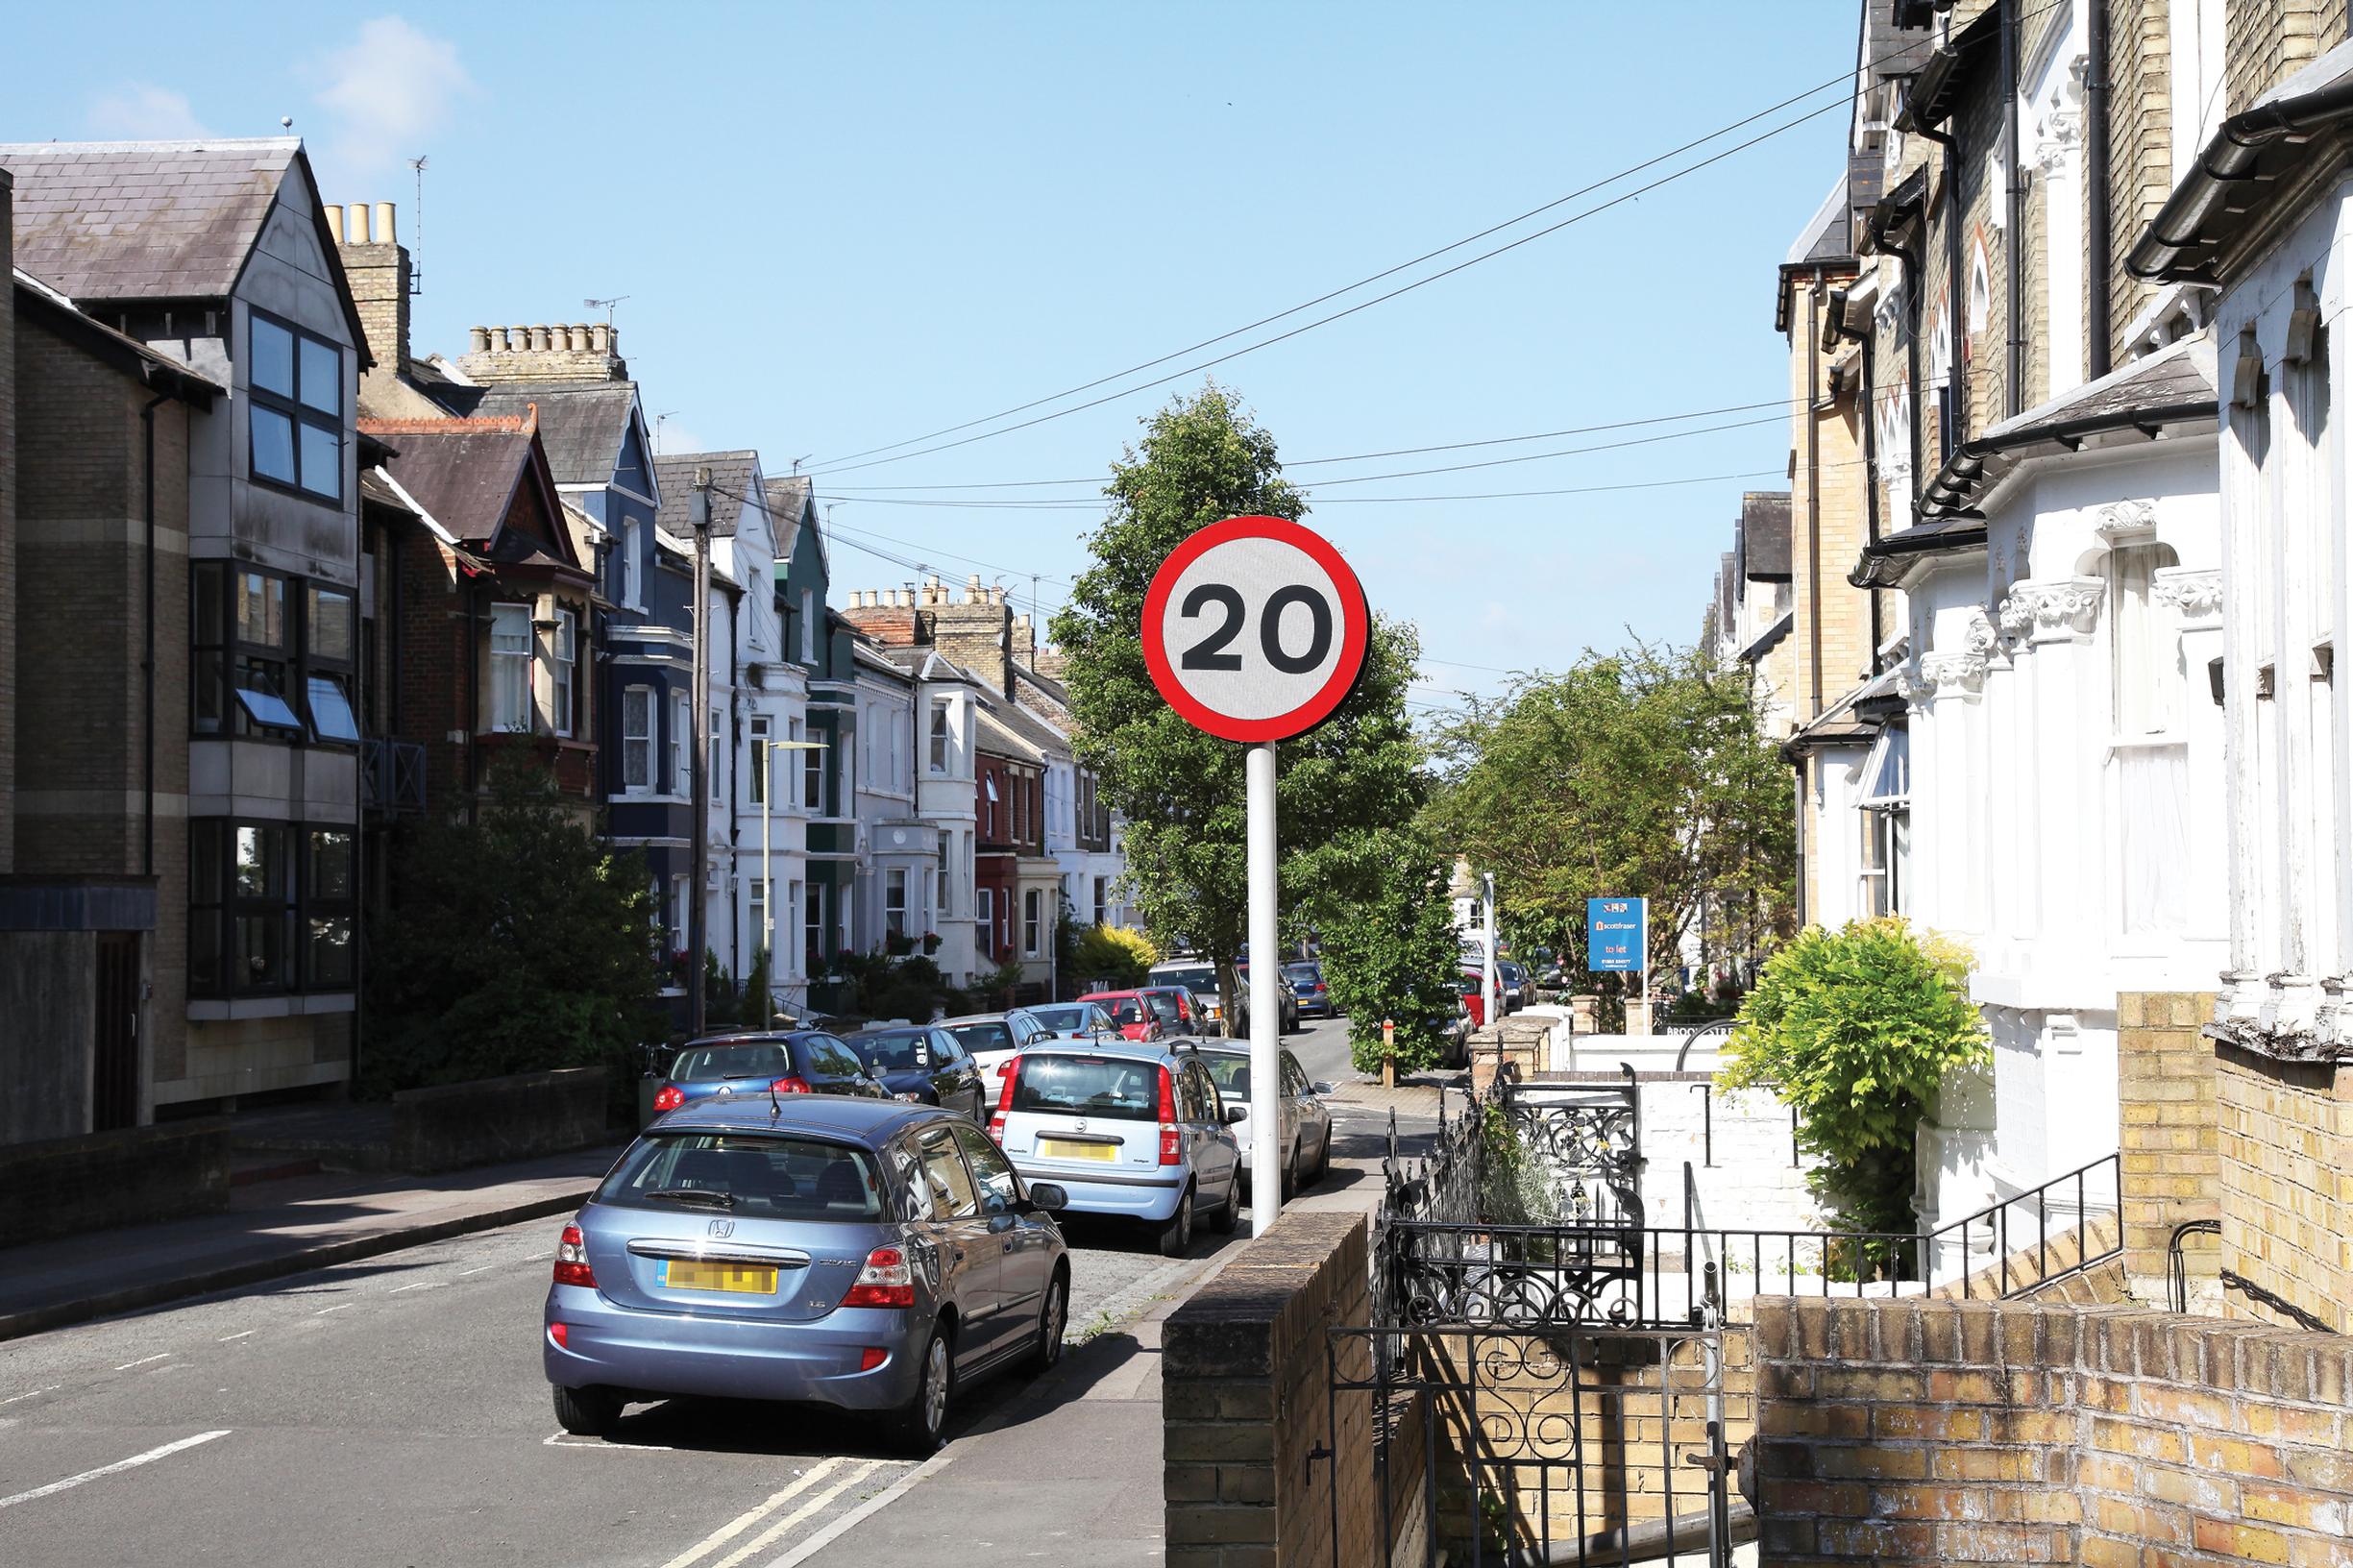 20’s Plenty is wrong to champion a study of Bristol’s 20mph limits while criticising the DfT’s research project, says Mike Maher